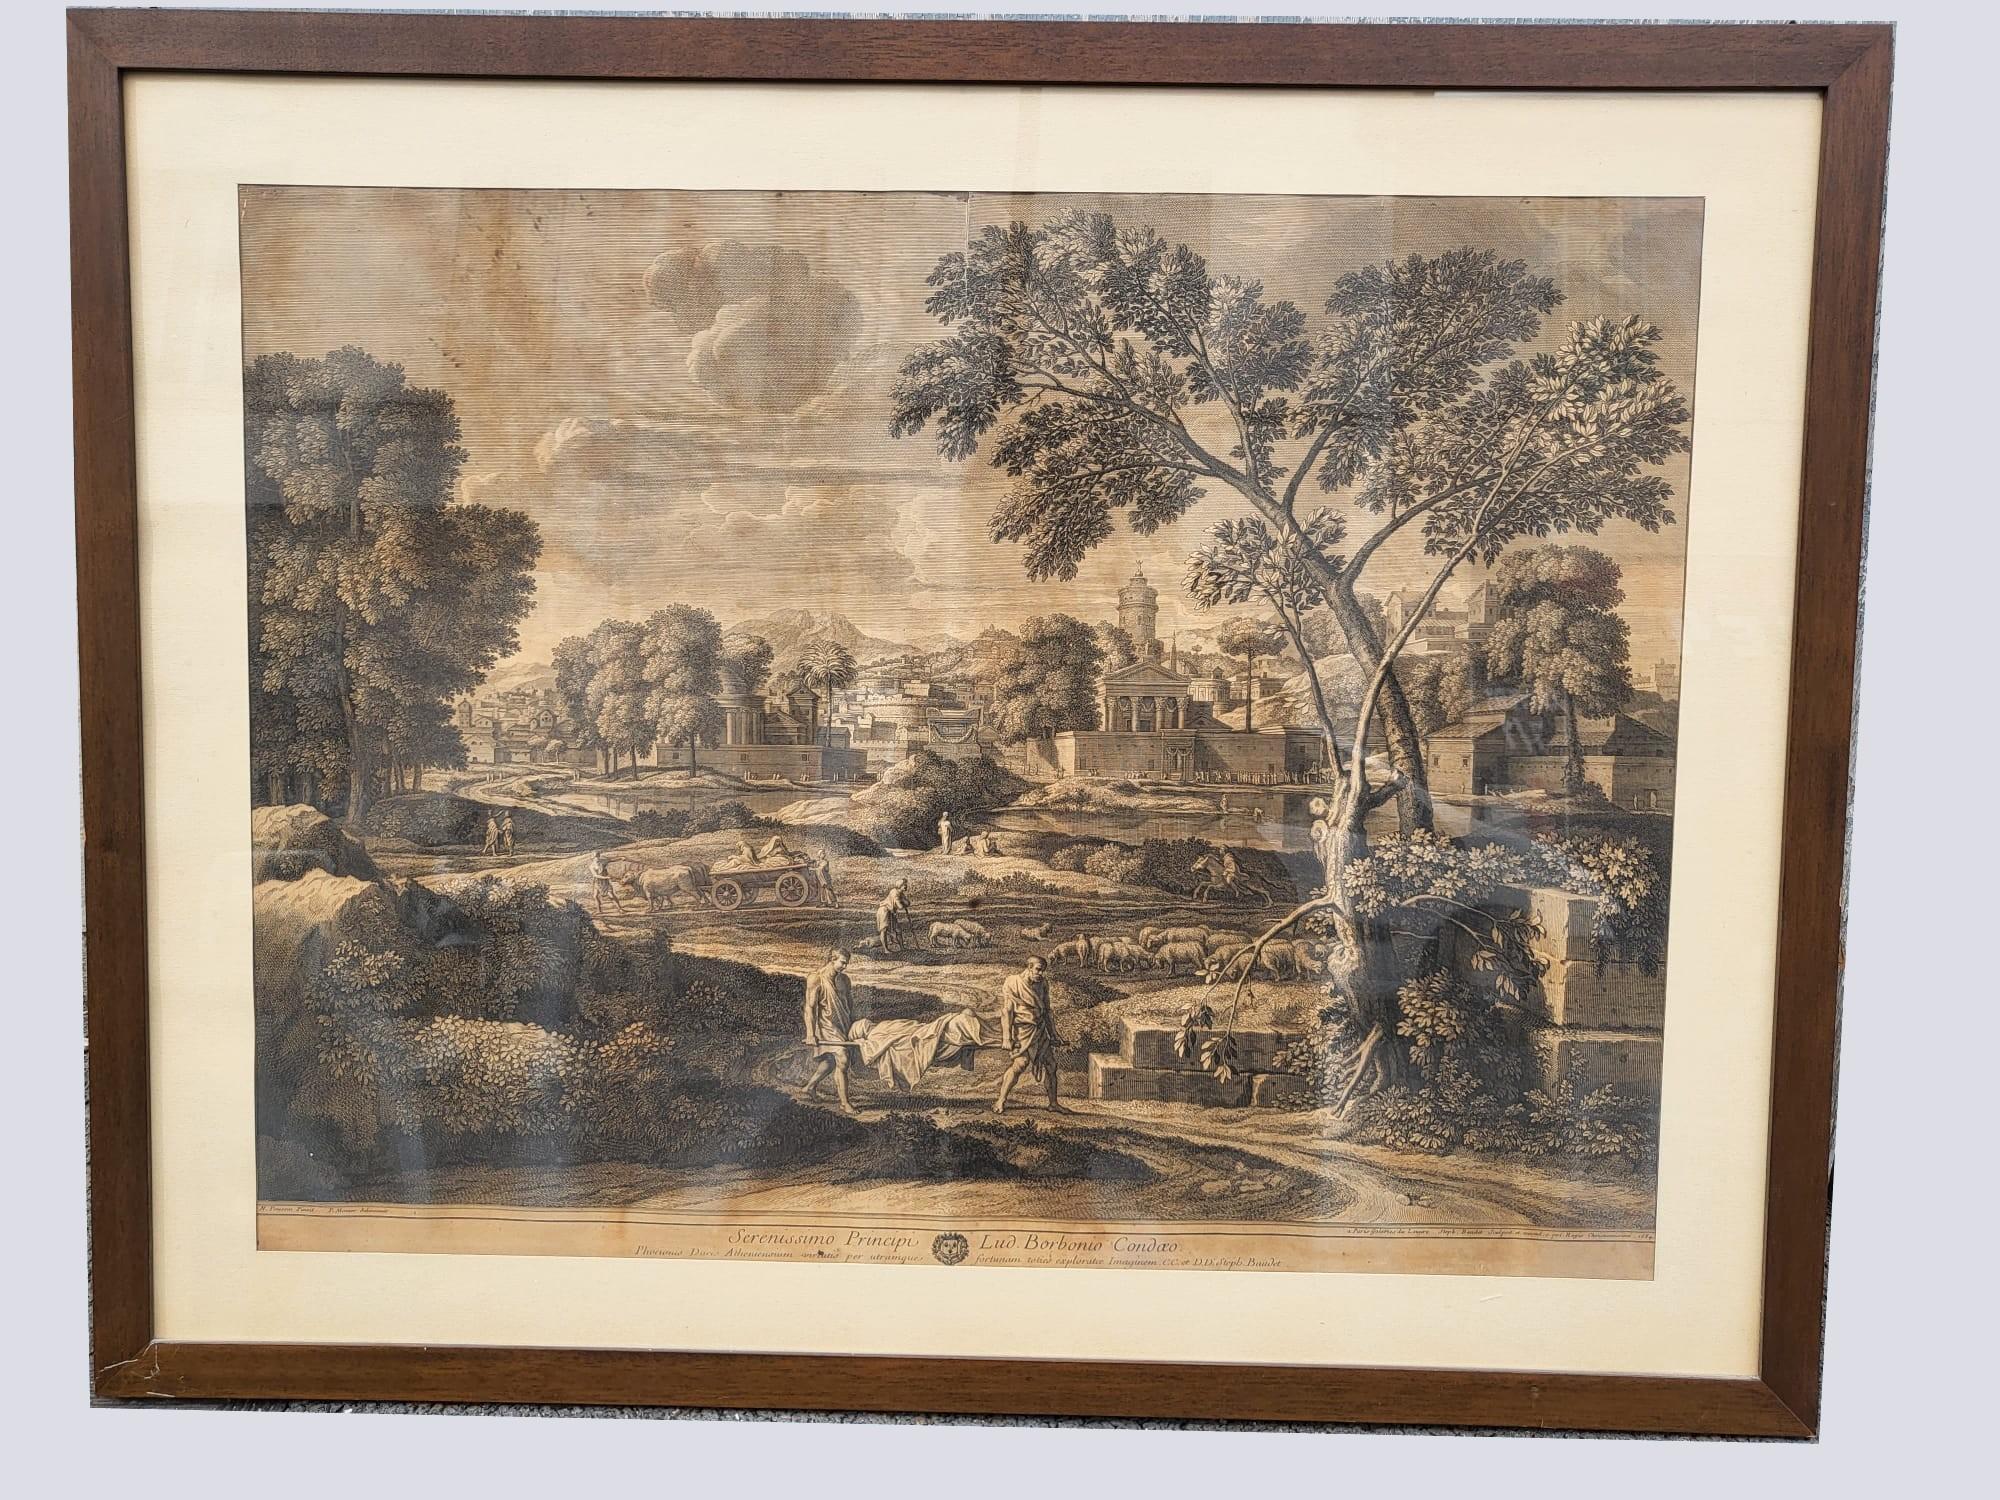 Paper N Poussin And E Baudet, Suite Of 3 Framed Engravings, Late 18th Century Early 19